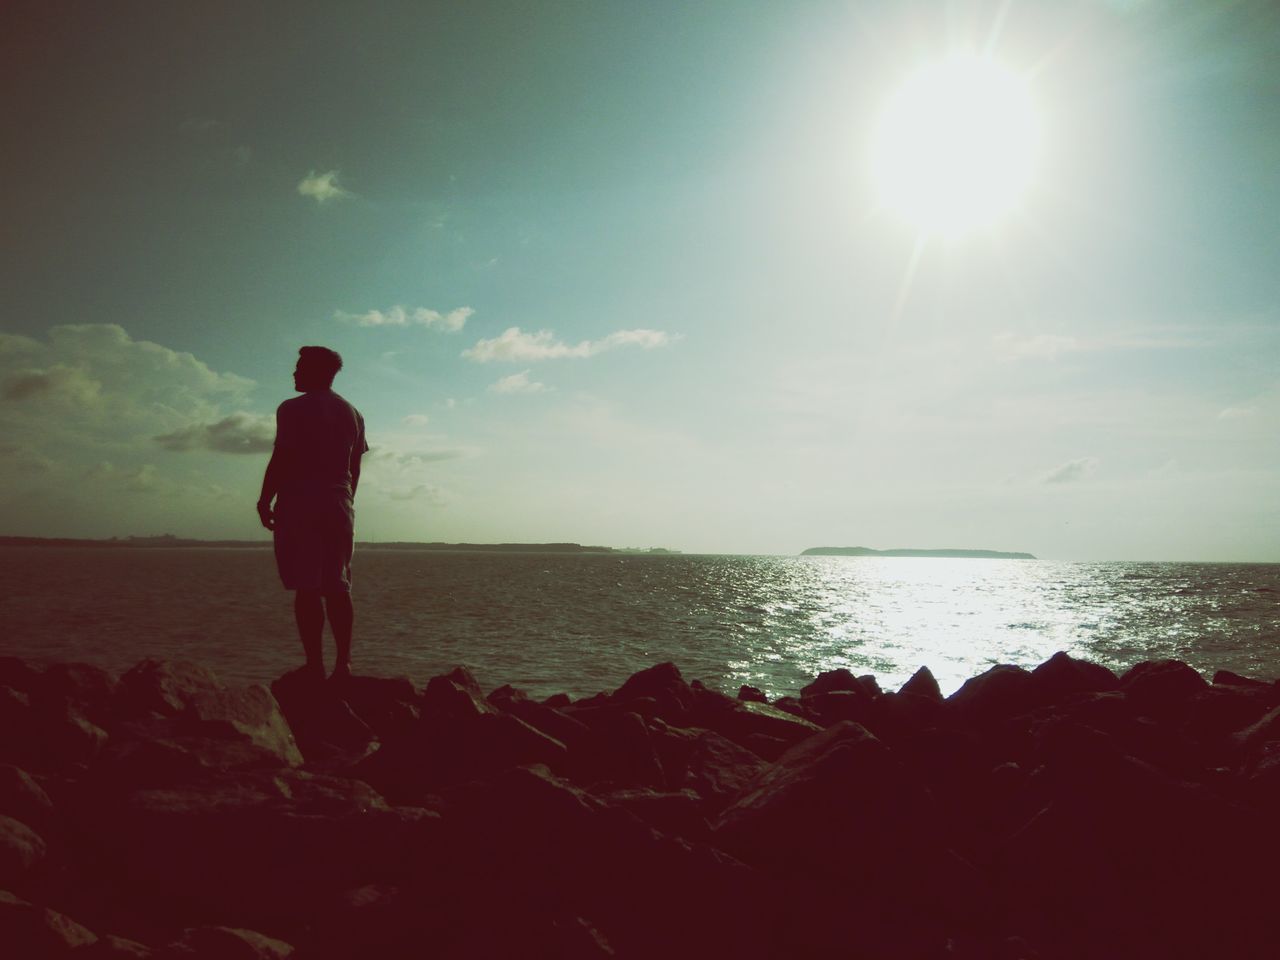 MAN STANDING ON SEA SHORE AGAINST SKY